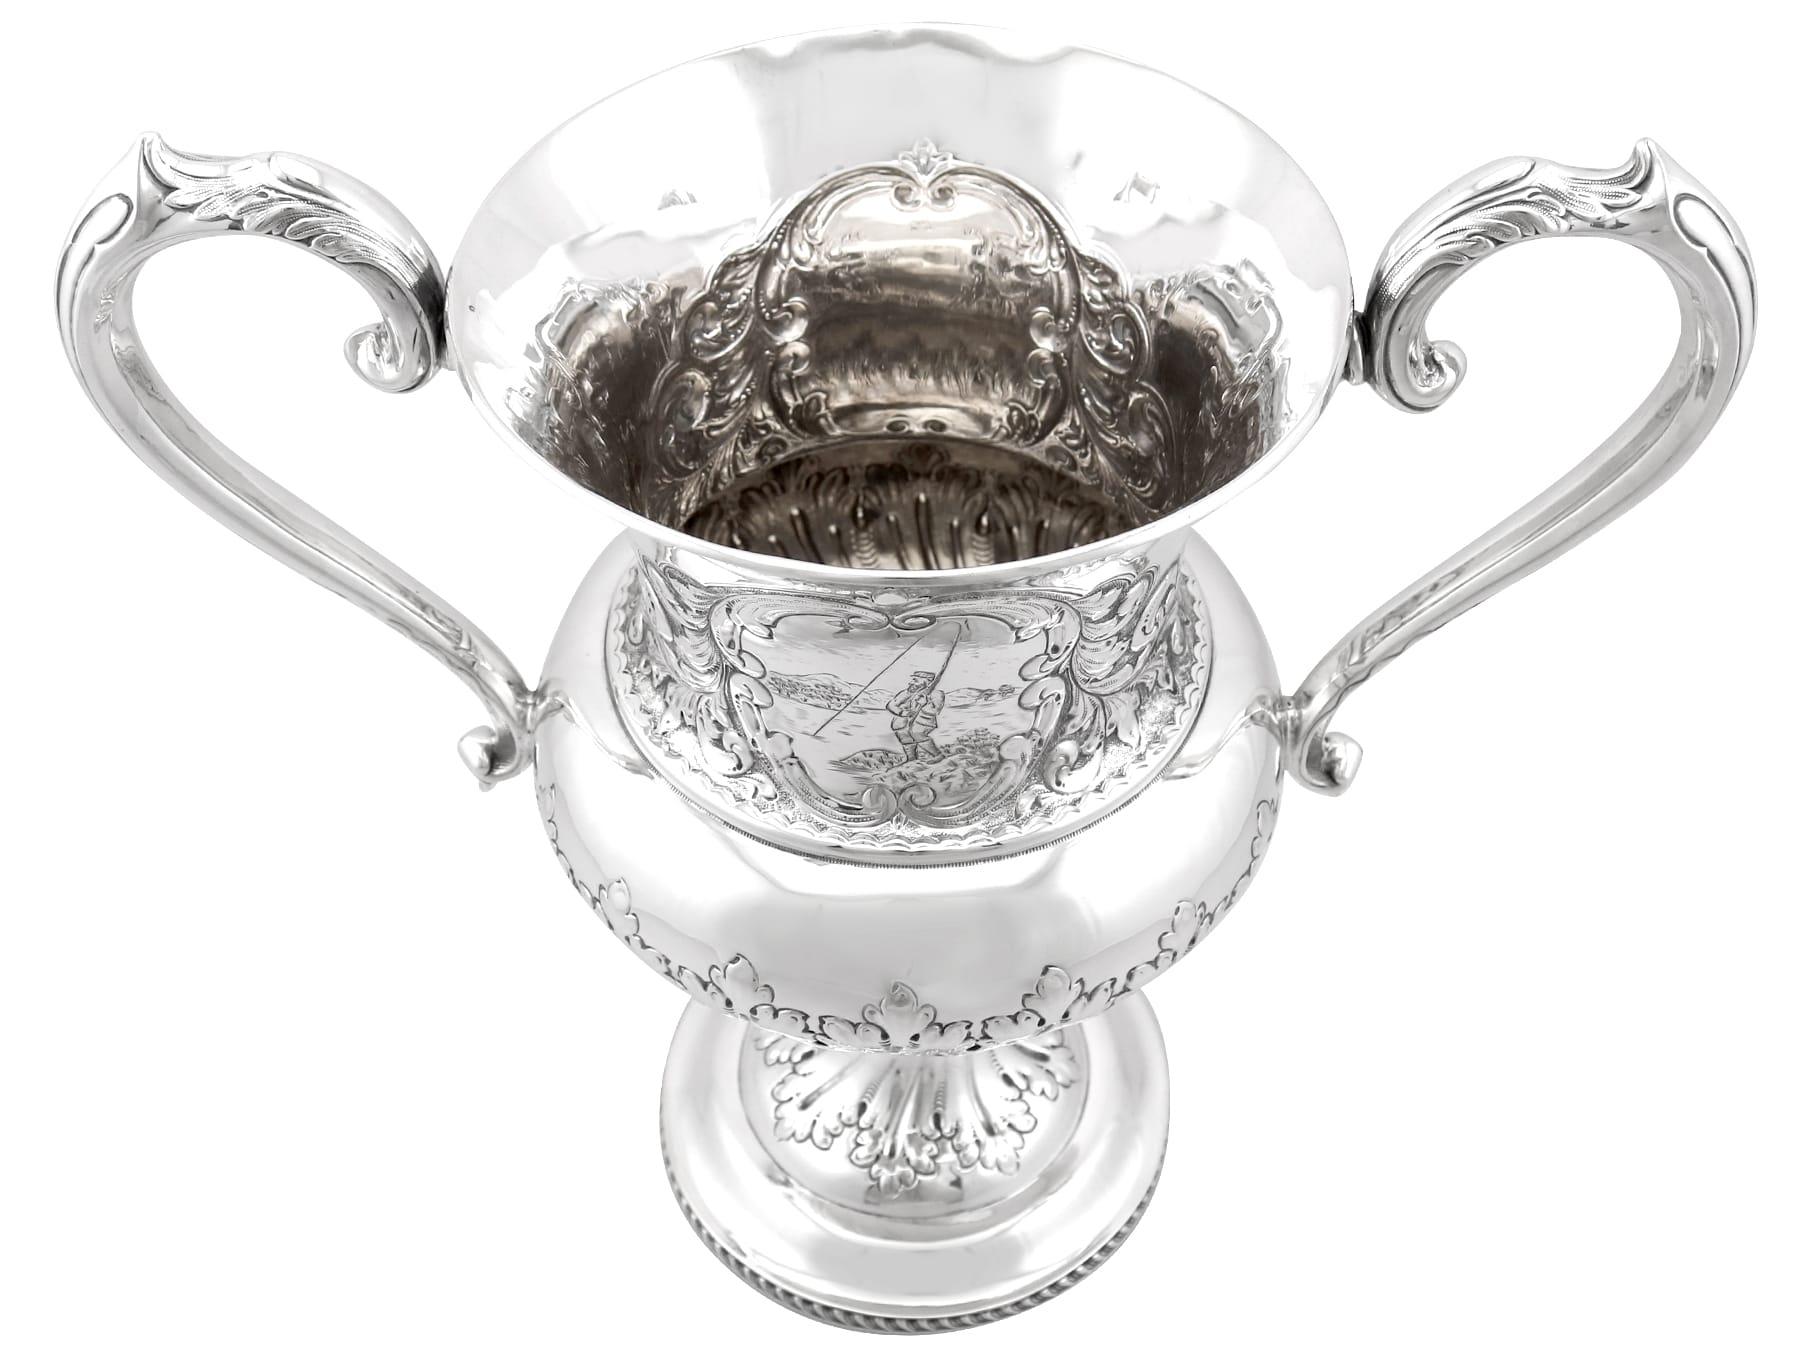 Antique Edwardian Sterling Silver Presentation Cup In Excellent Condition For Sale In Jesmond, Newcastle Upon Tyne